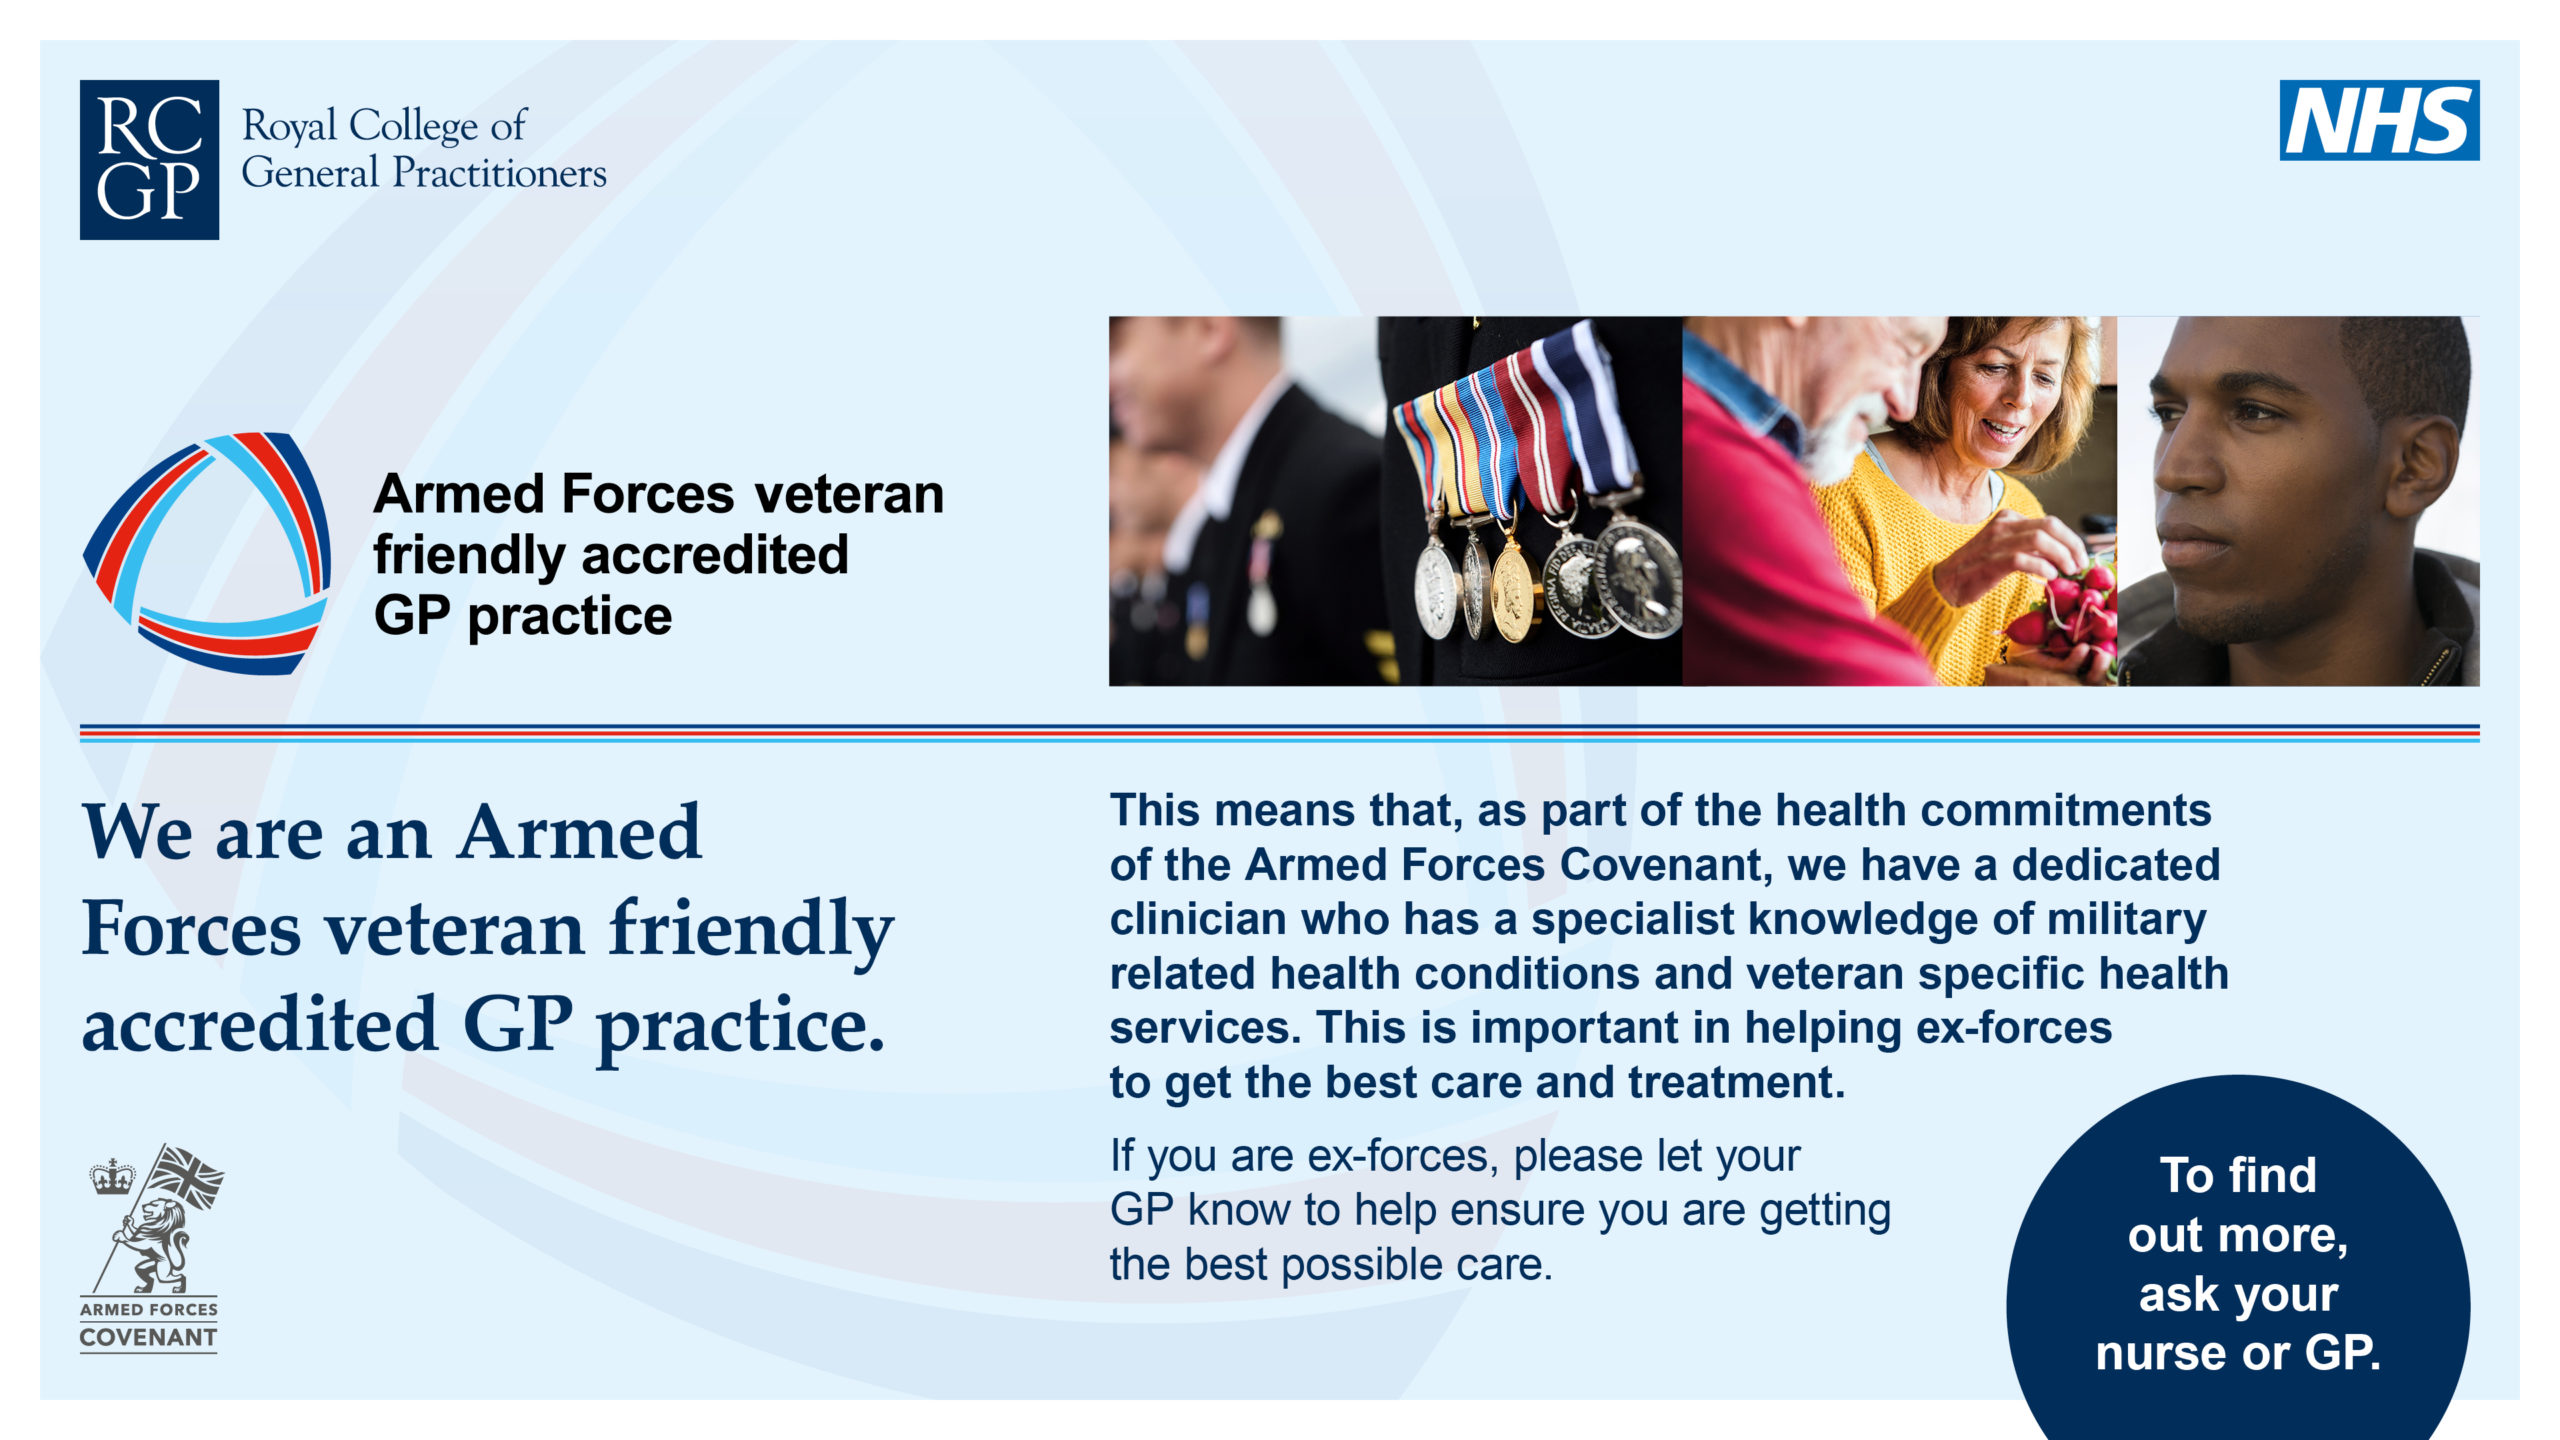 We are an Armed Forces veteran friendly accredited GP practice.